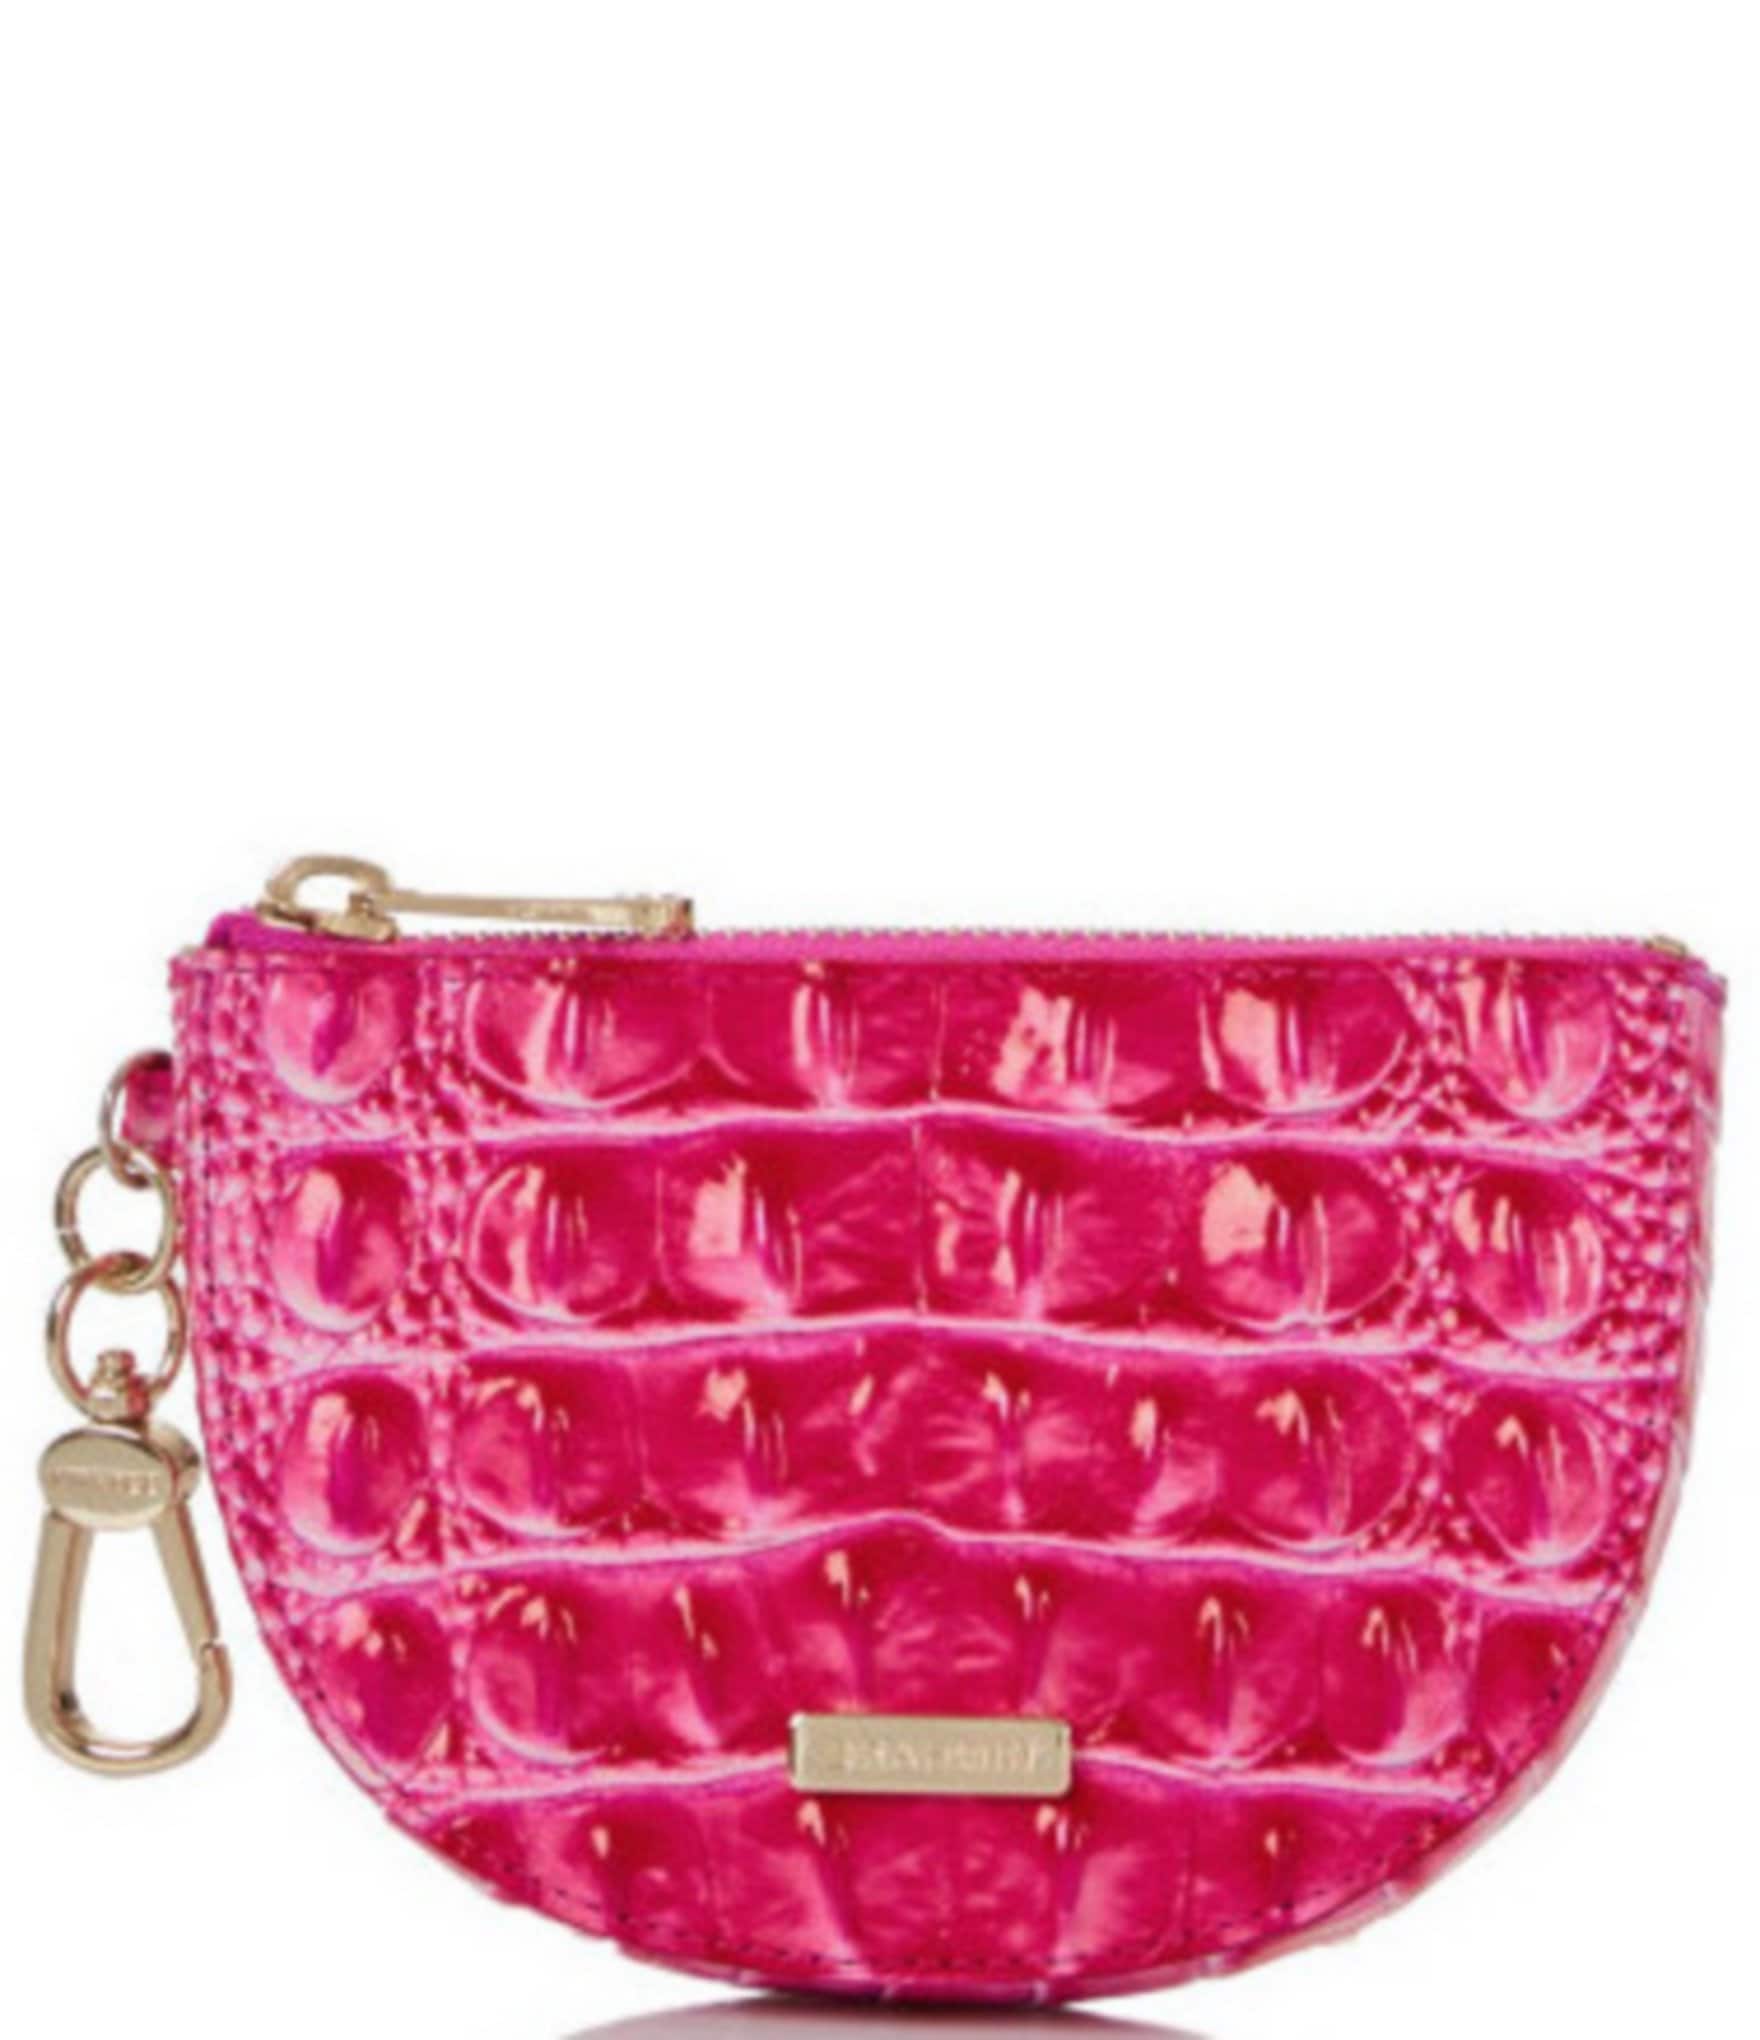 Brahmin Handbags - Think PINK (Cosmo) 💕 View the collection